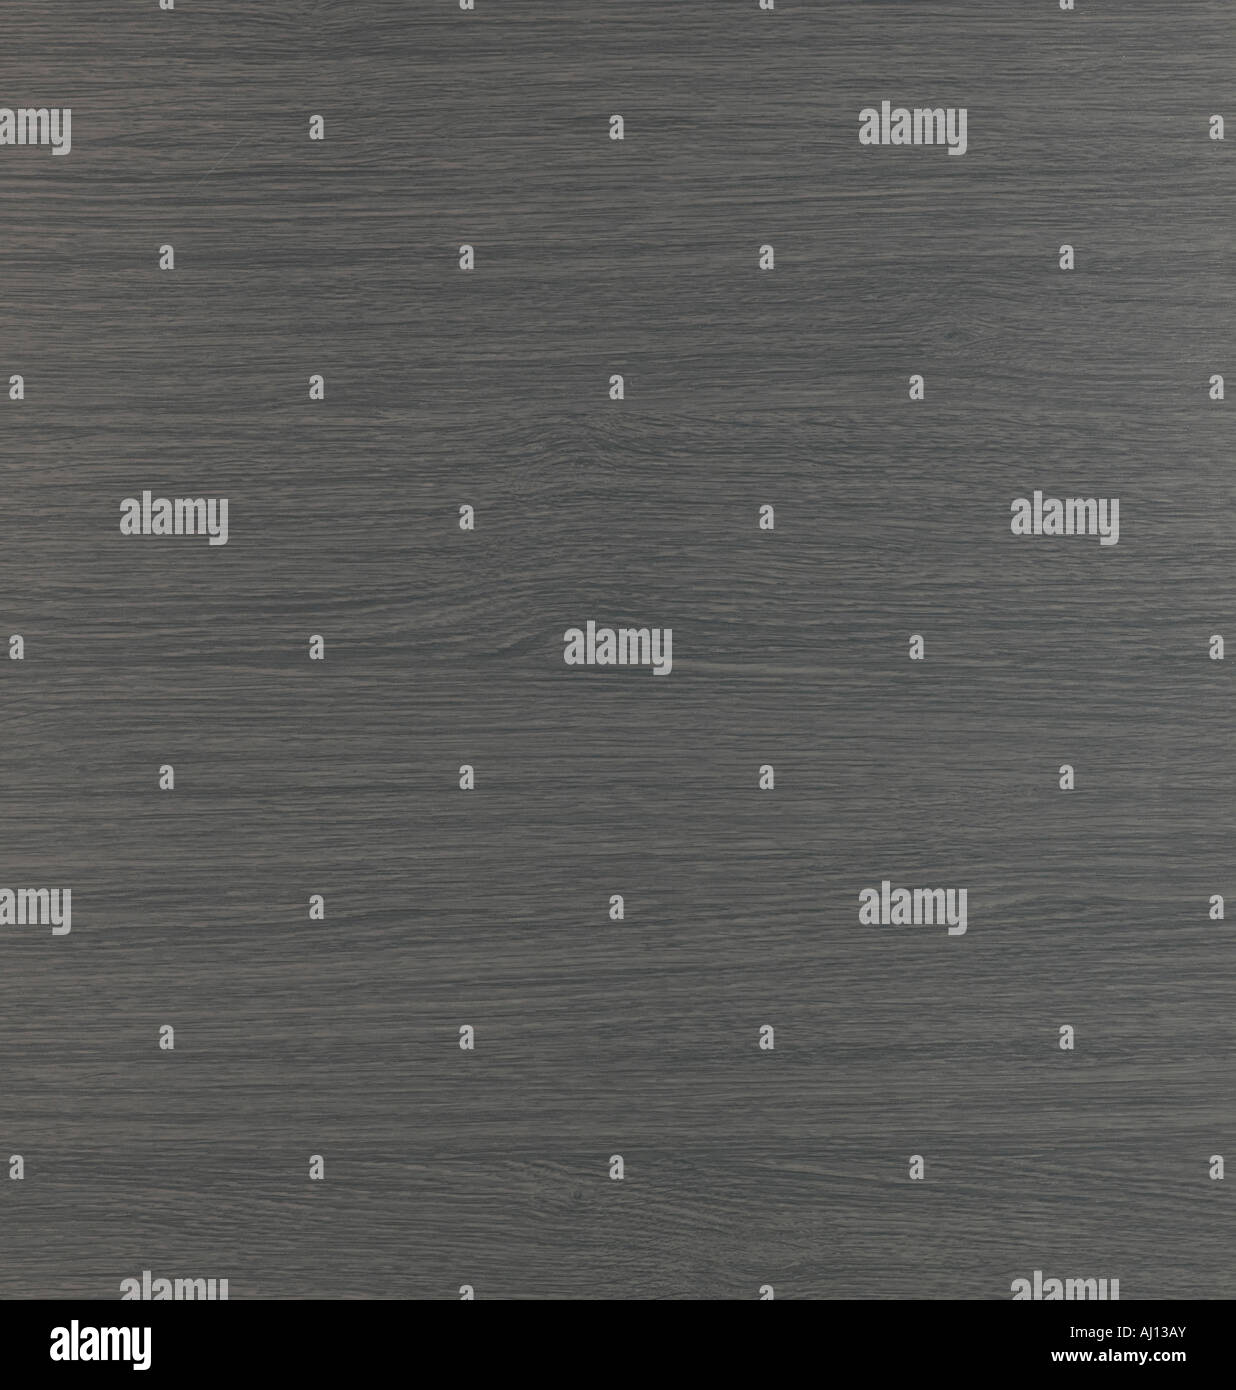 ABSTRACT GREY WOOD TIMBER GRAIN BACKGROUND Stock Photo